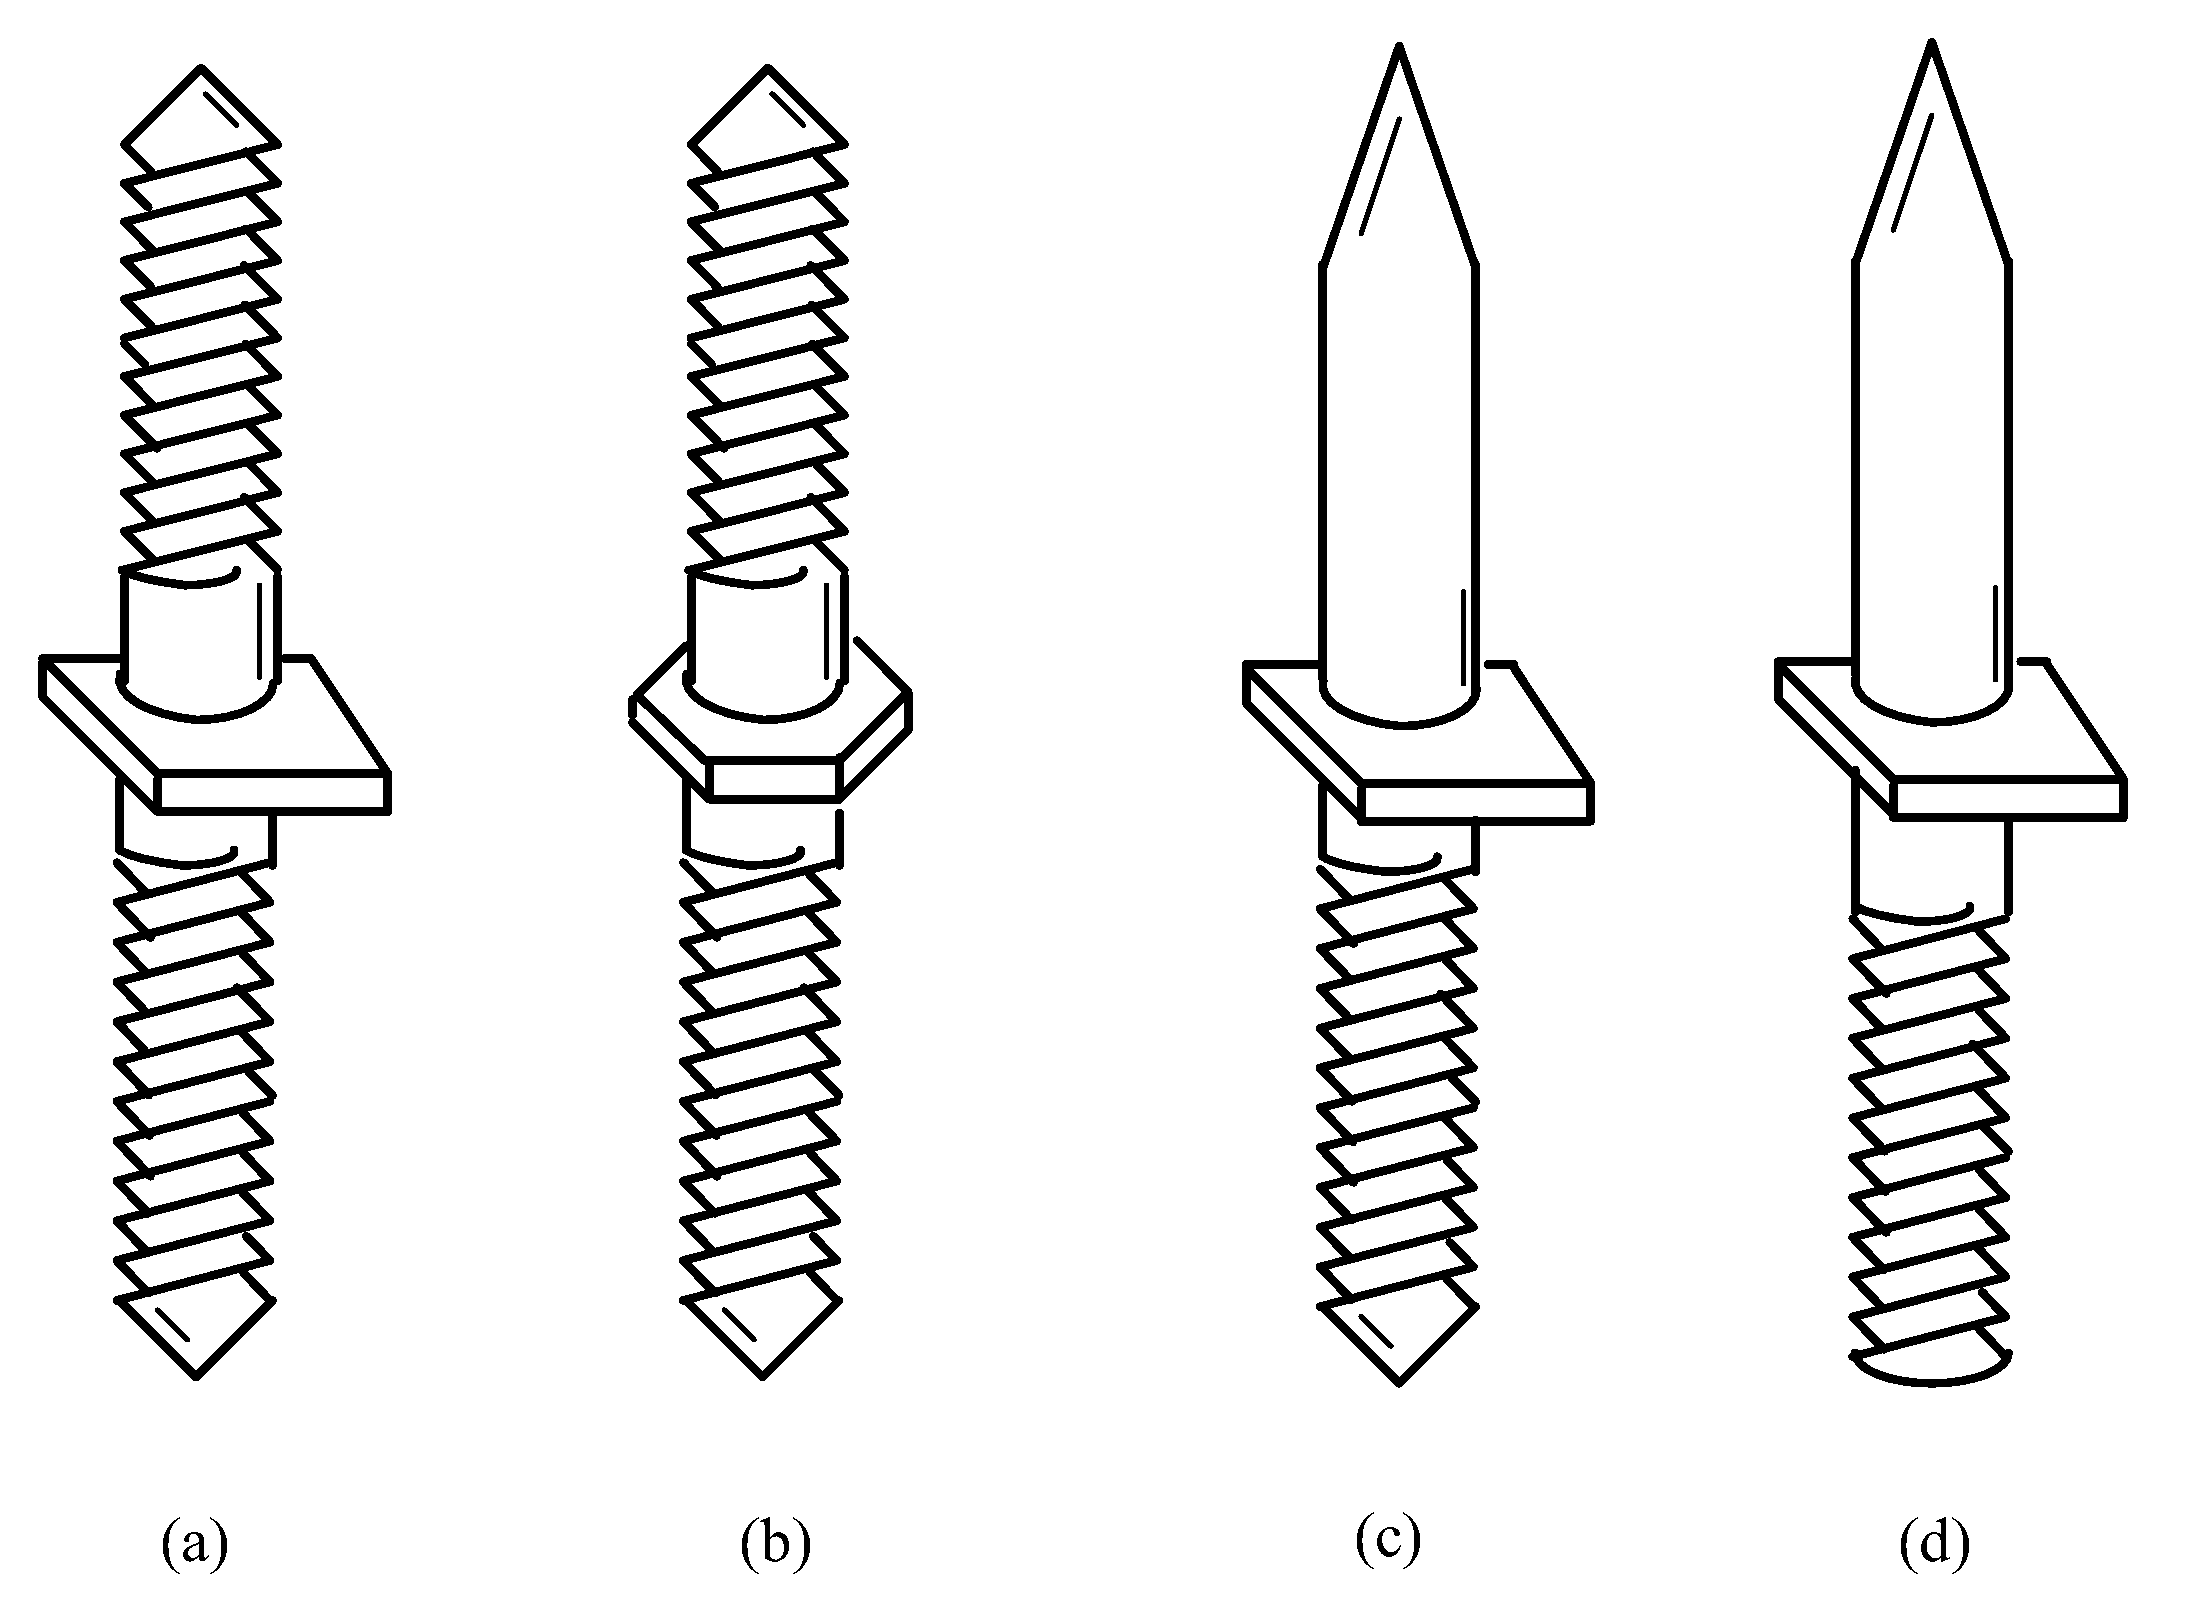 Two-way nails, two-way screws and their mounting tools